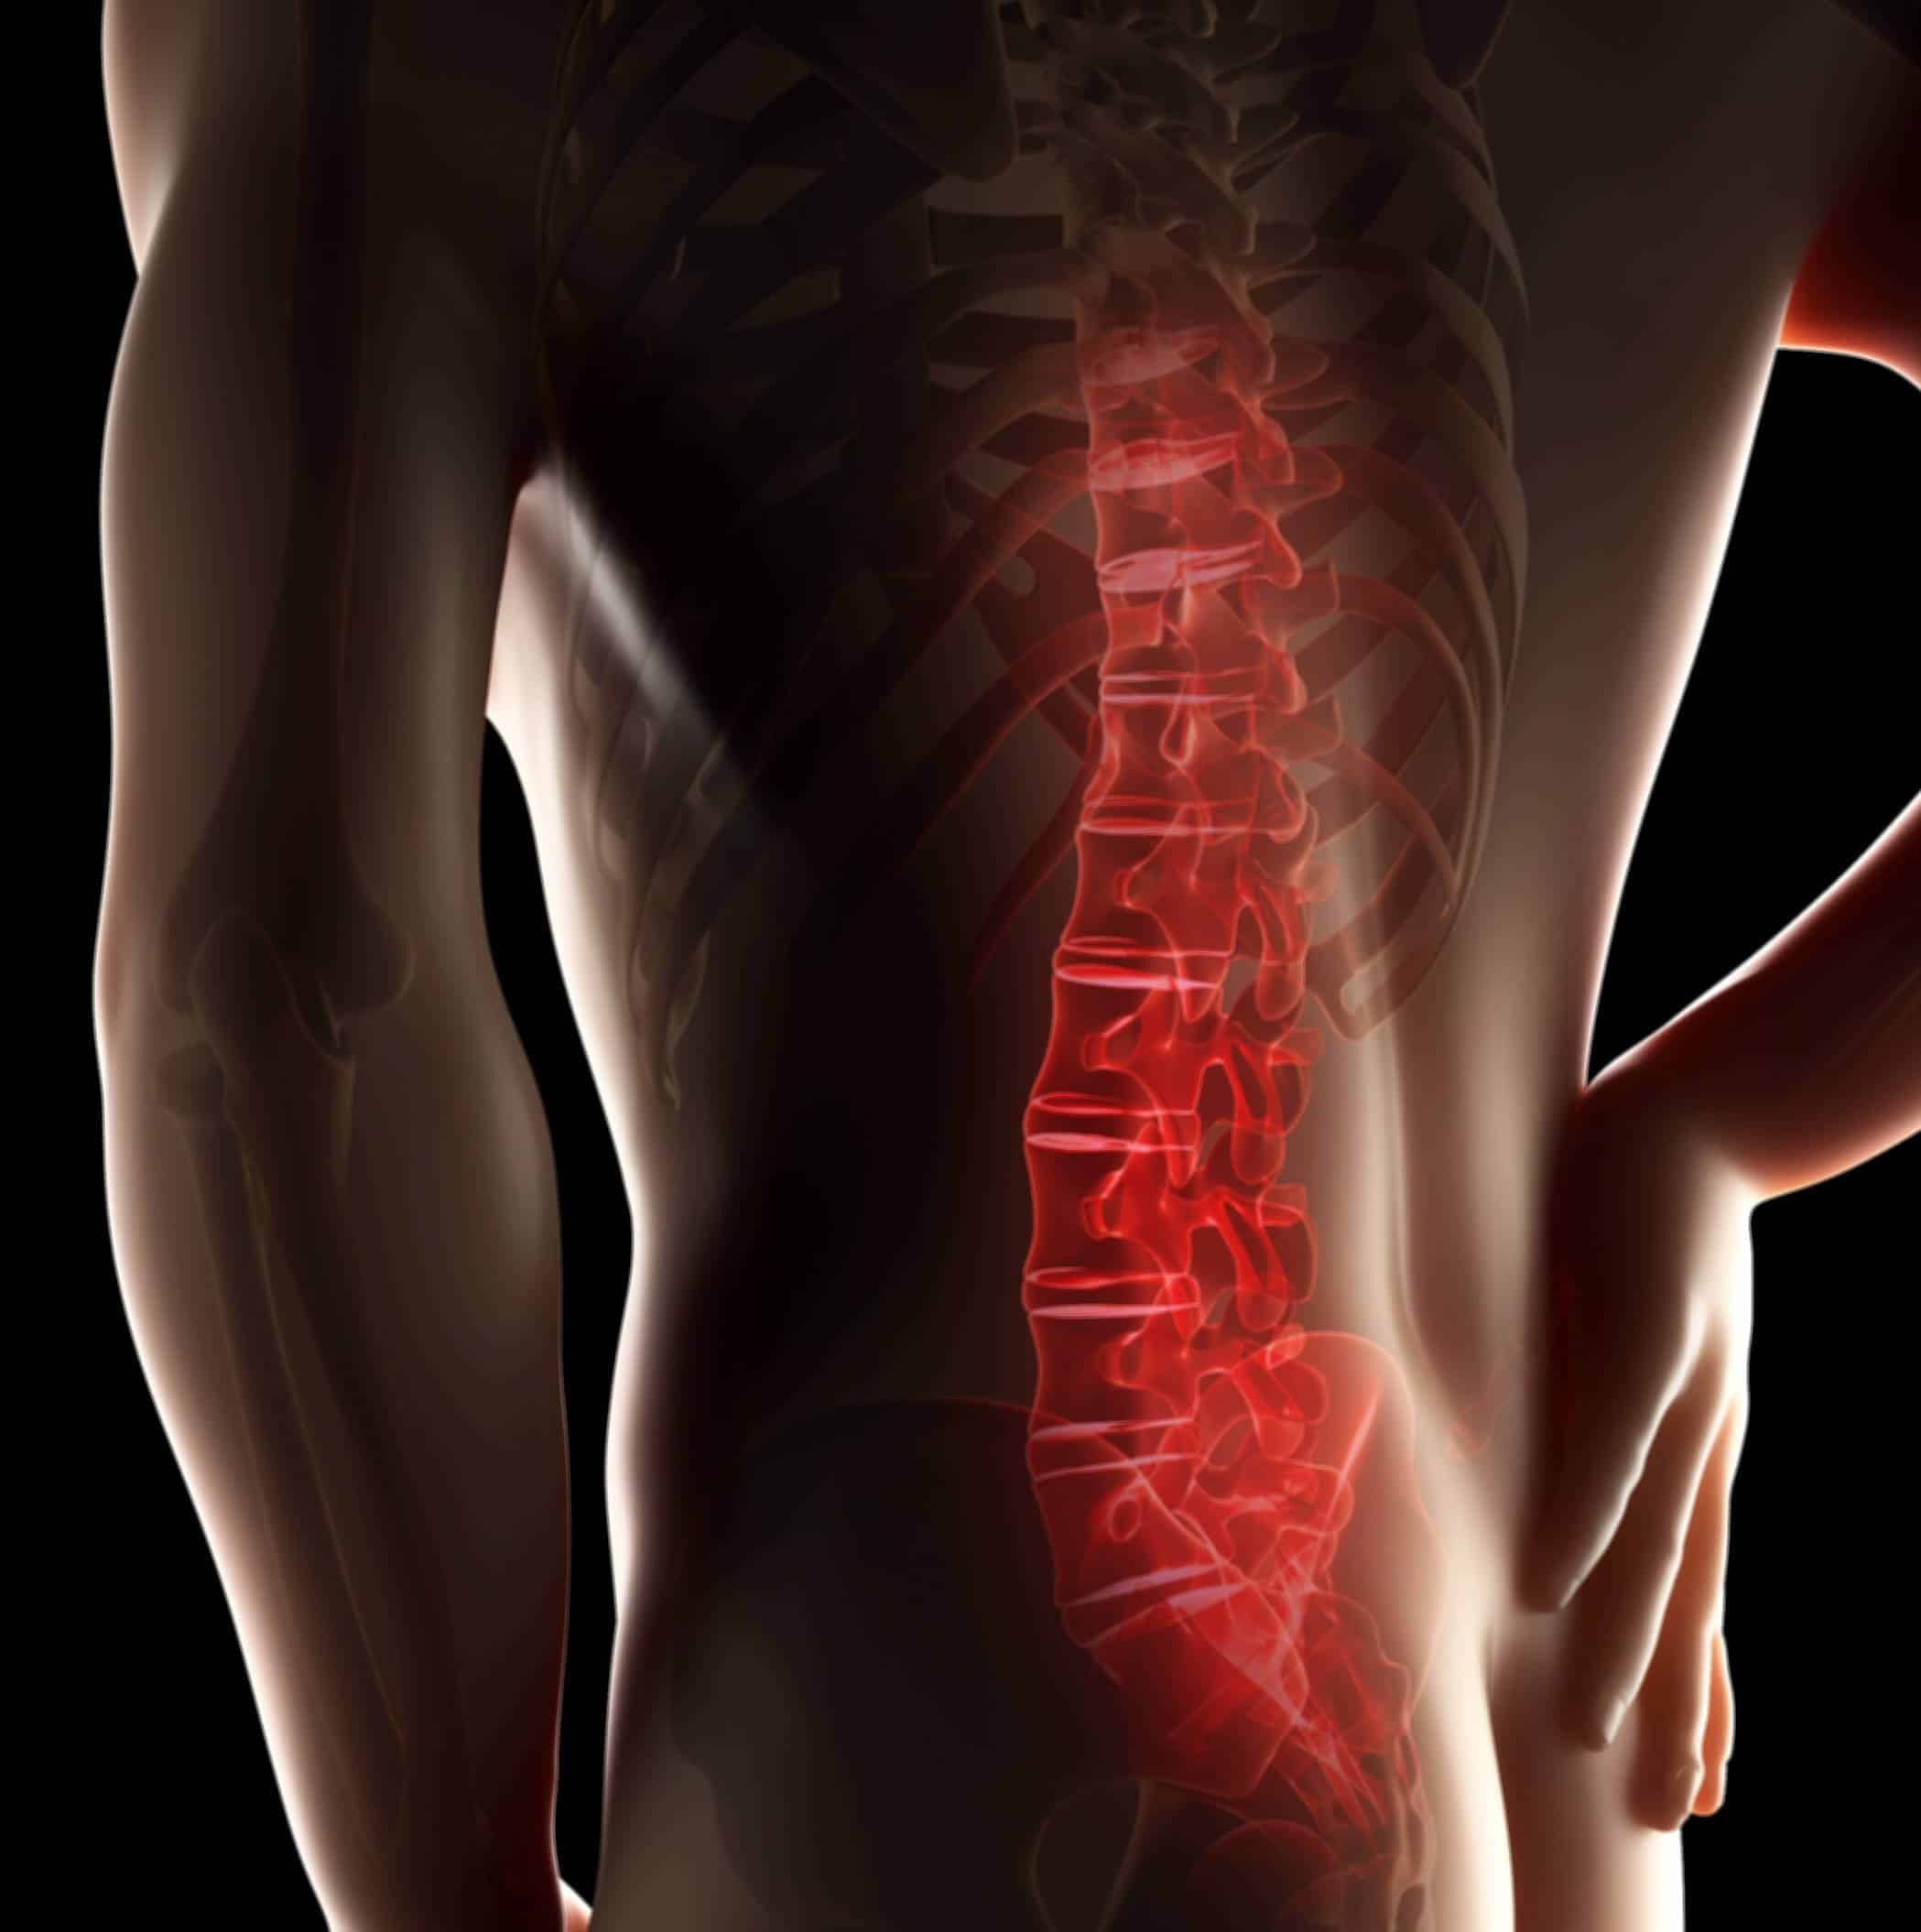 Spine Muscles in Pain? Myofascial Pain Syndrome May Be to Blame